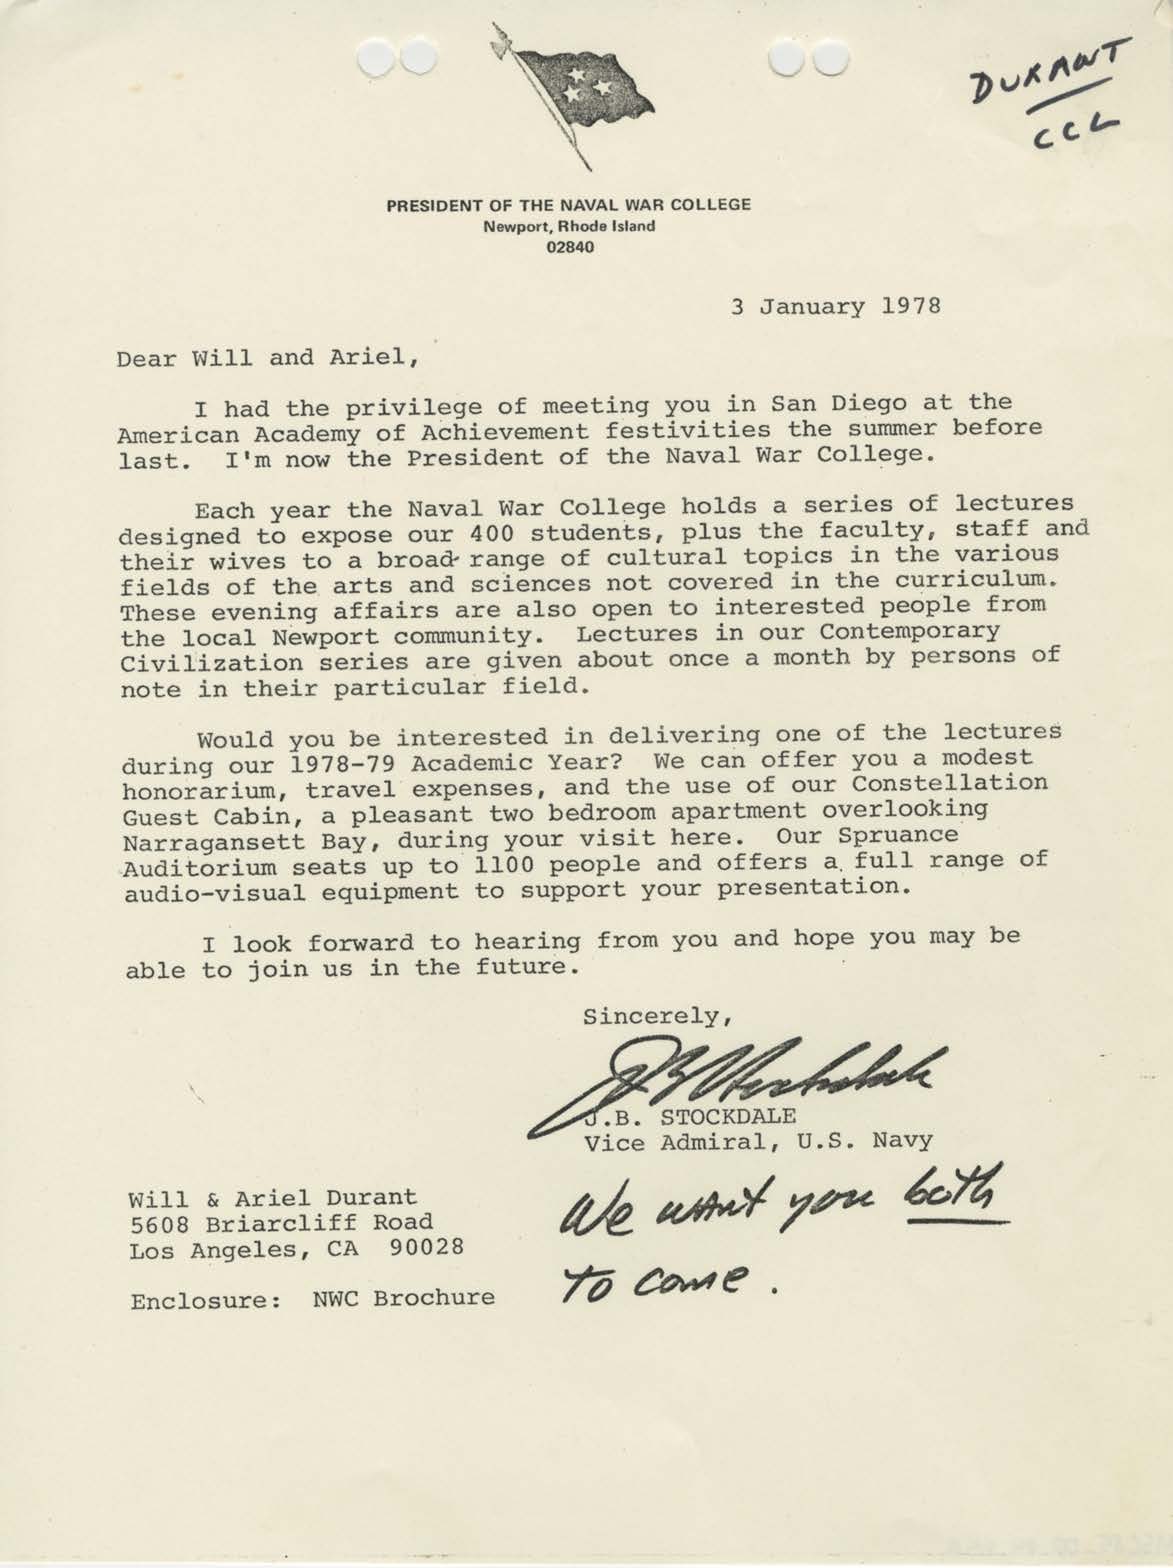 Letter from James B. Stockdale to Will and Ariel Durant